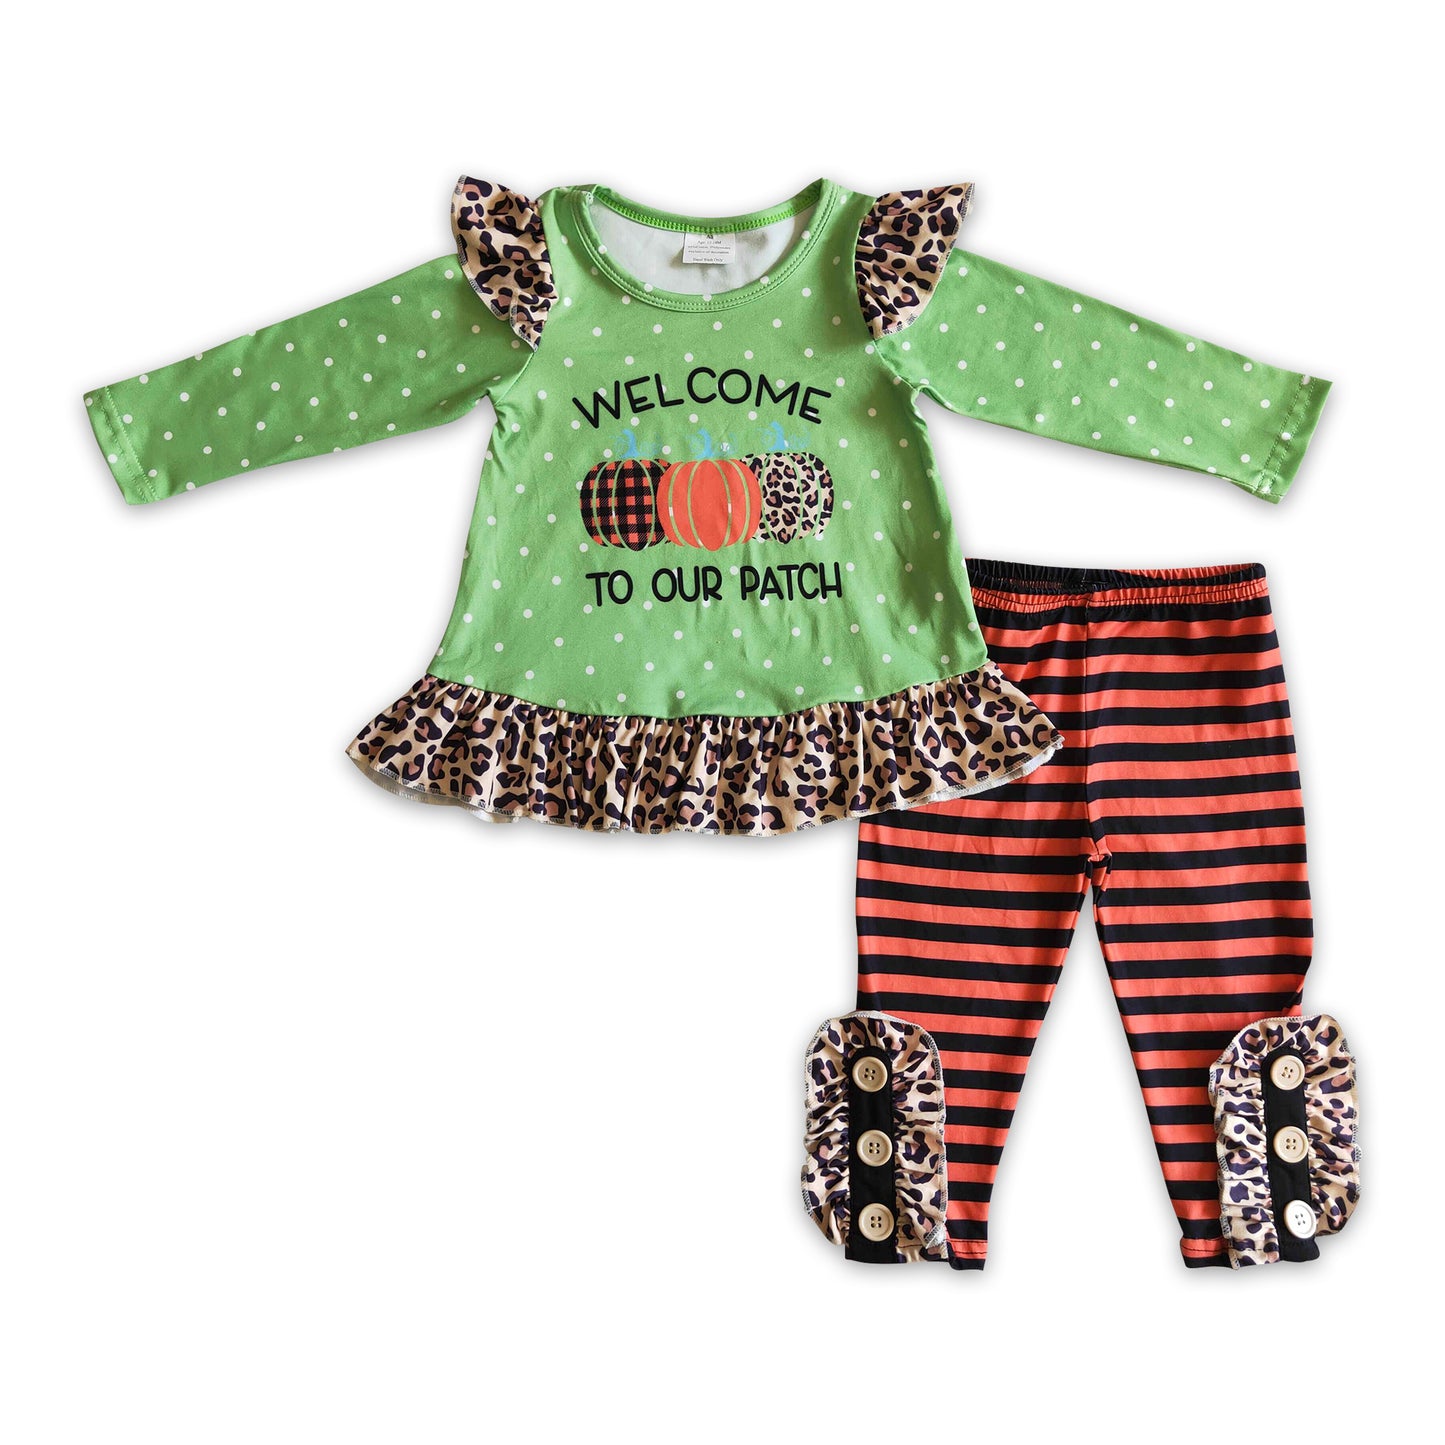 Welcome to our patch pumpkin stripe leggings girls fall clothes